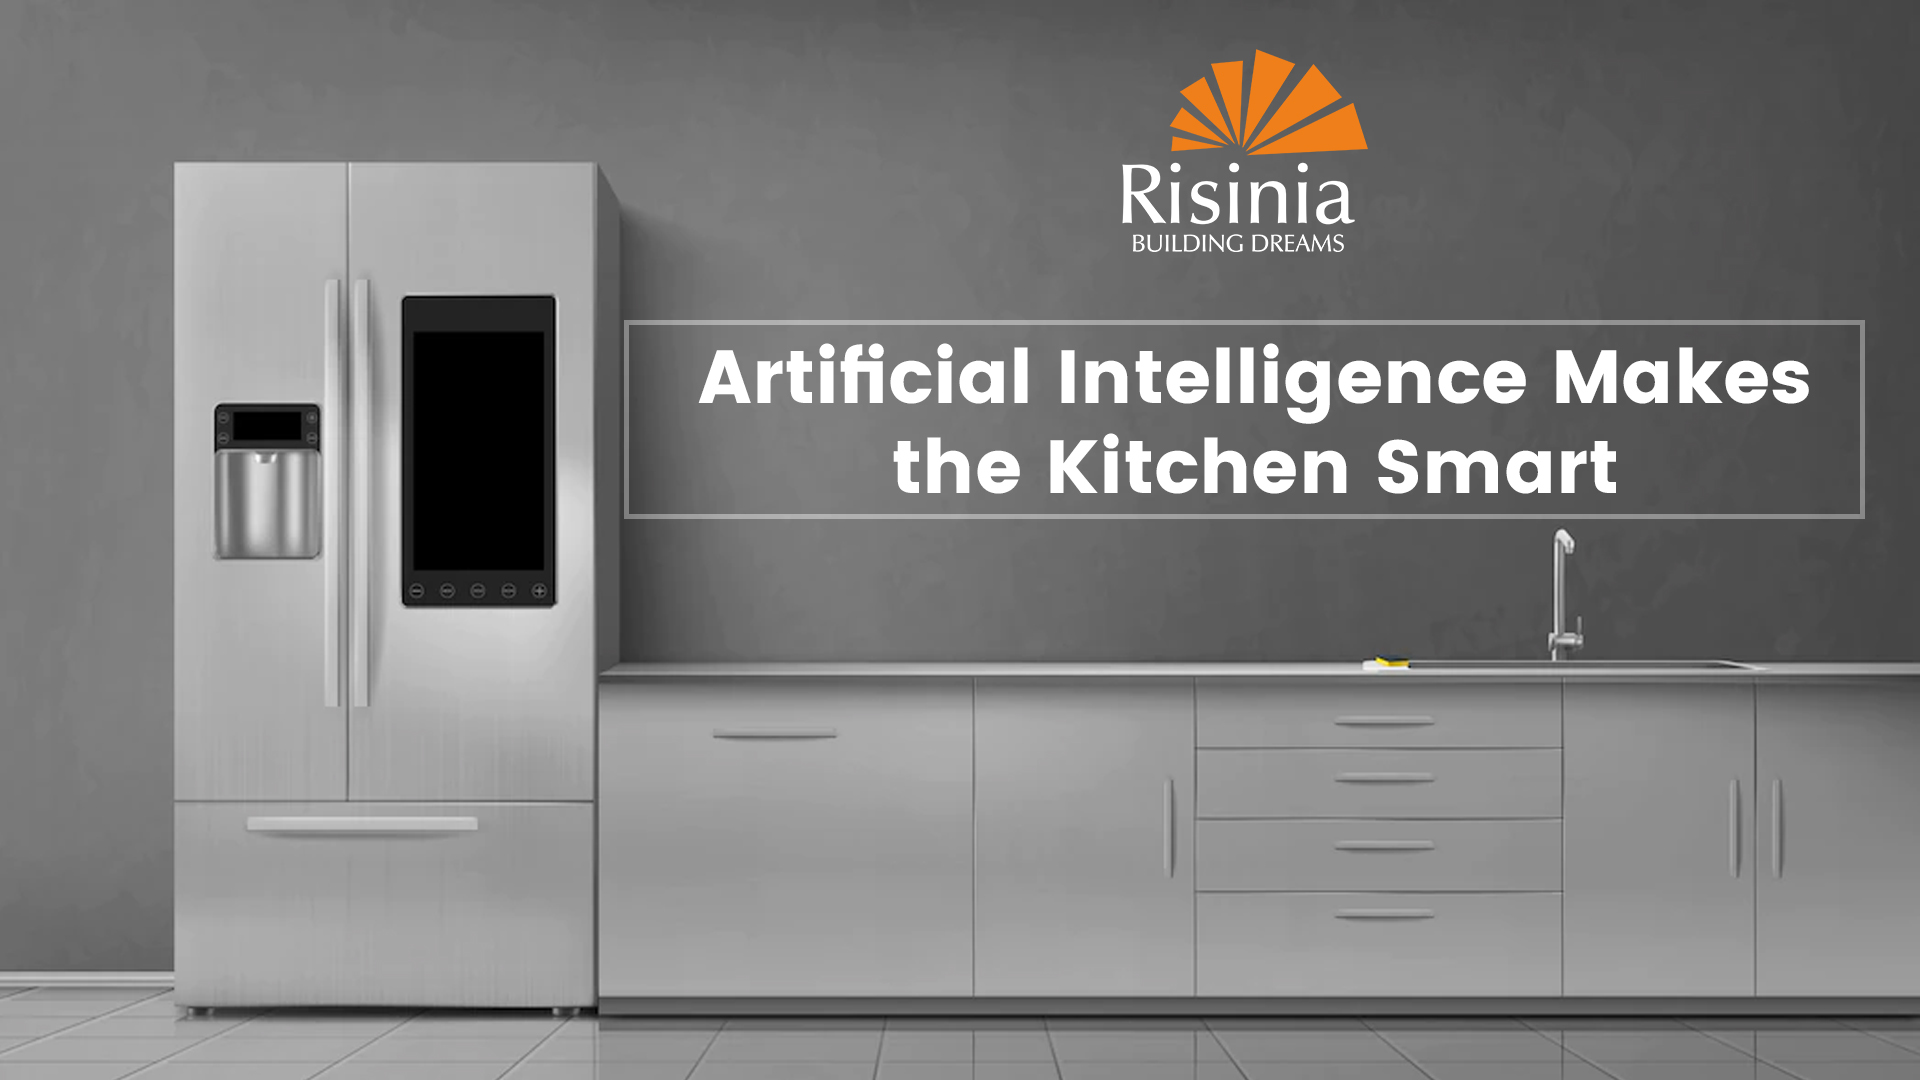 Artificial Intelligence Makes the Kitchen Smart